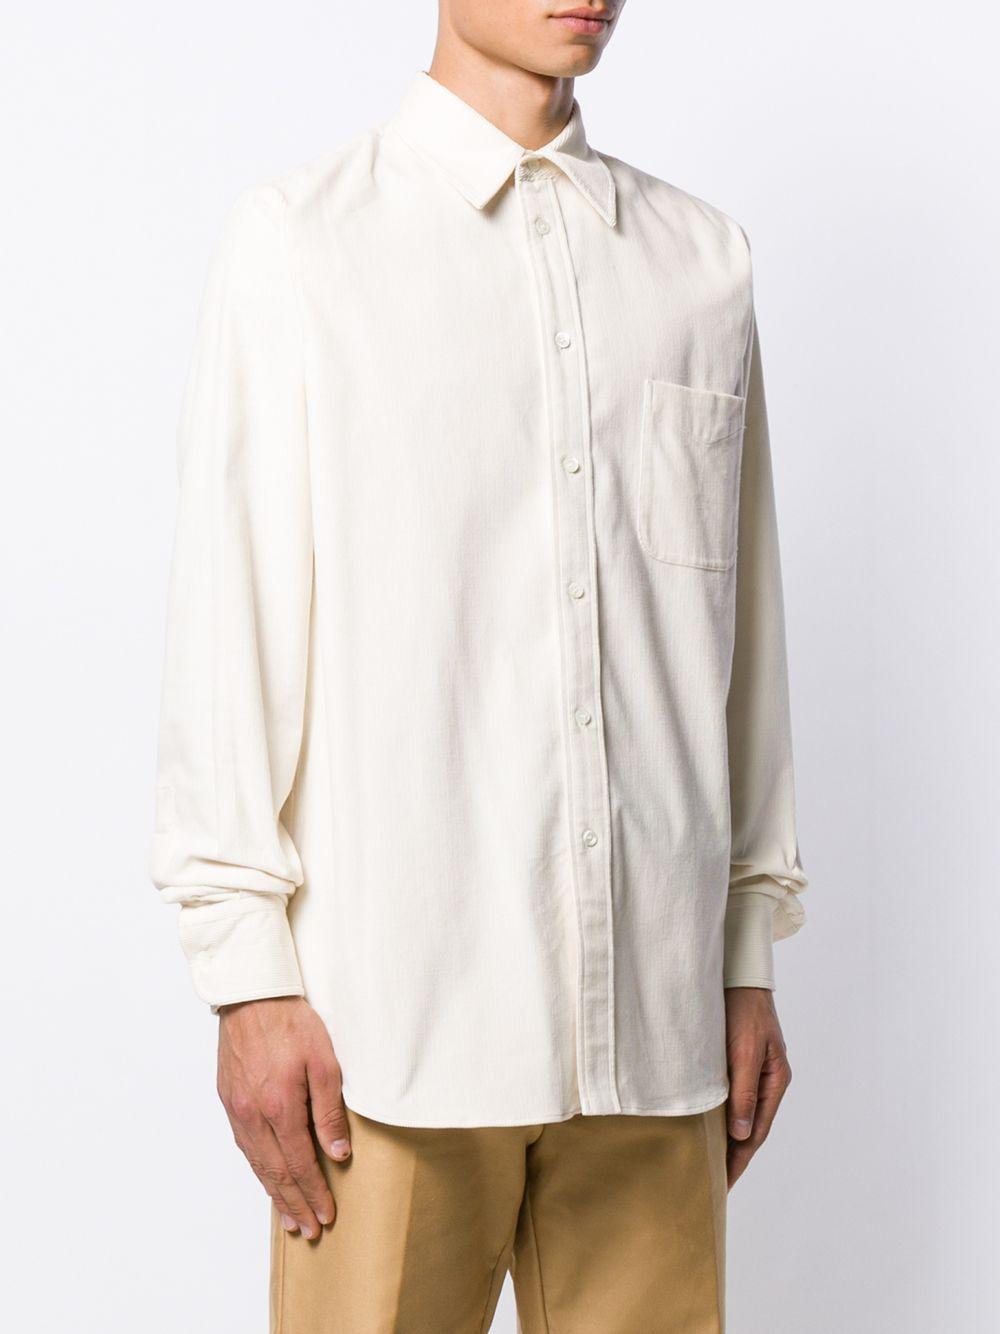 Marni Cotton Long-sleeved Corduroy Shirt in White for Men - Lyst